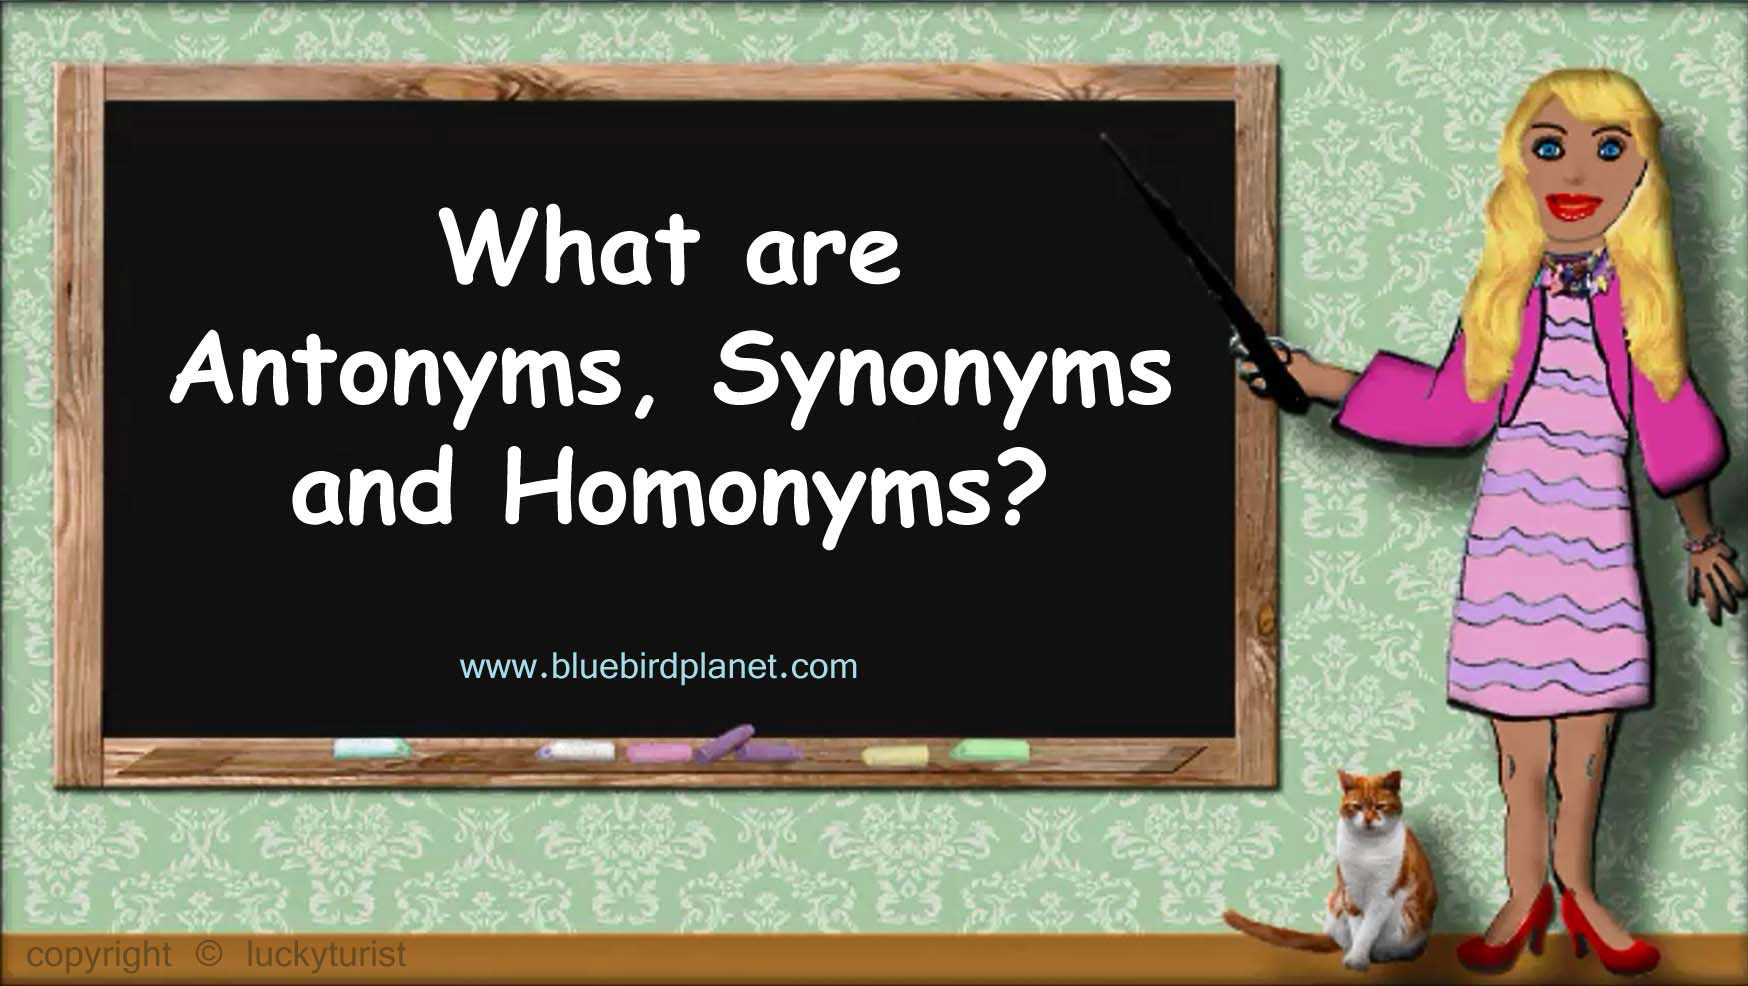 What are antonyms?